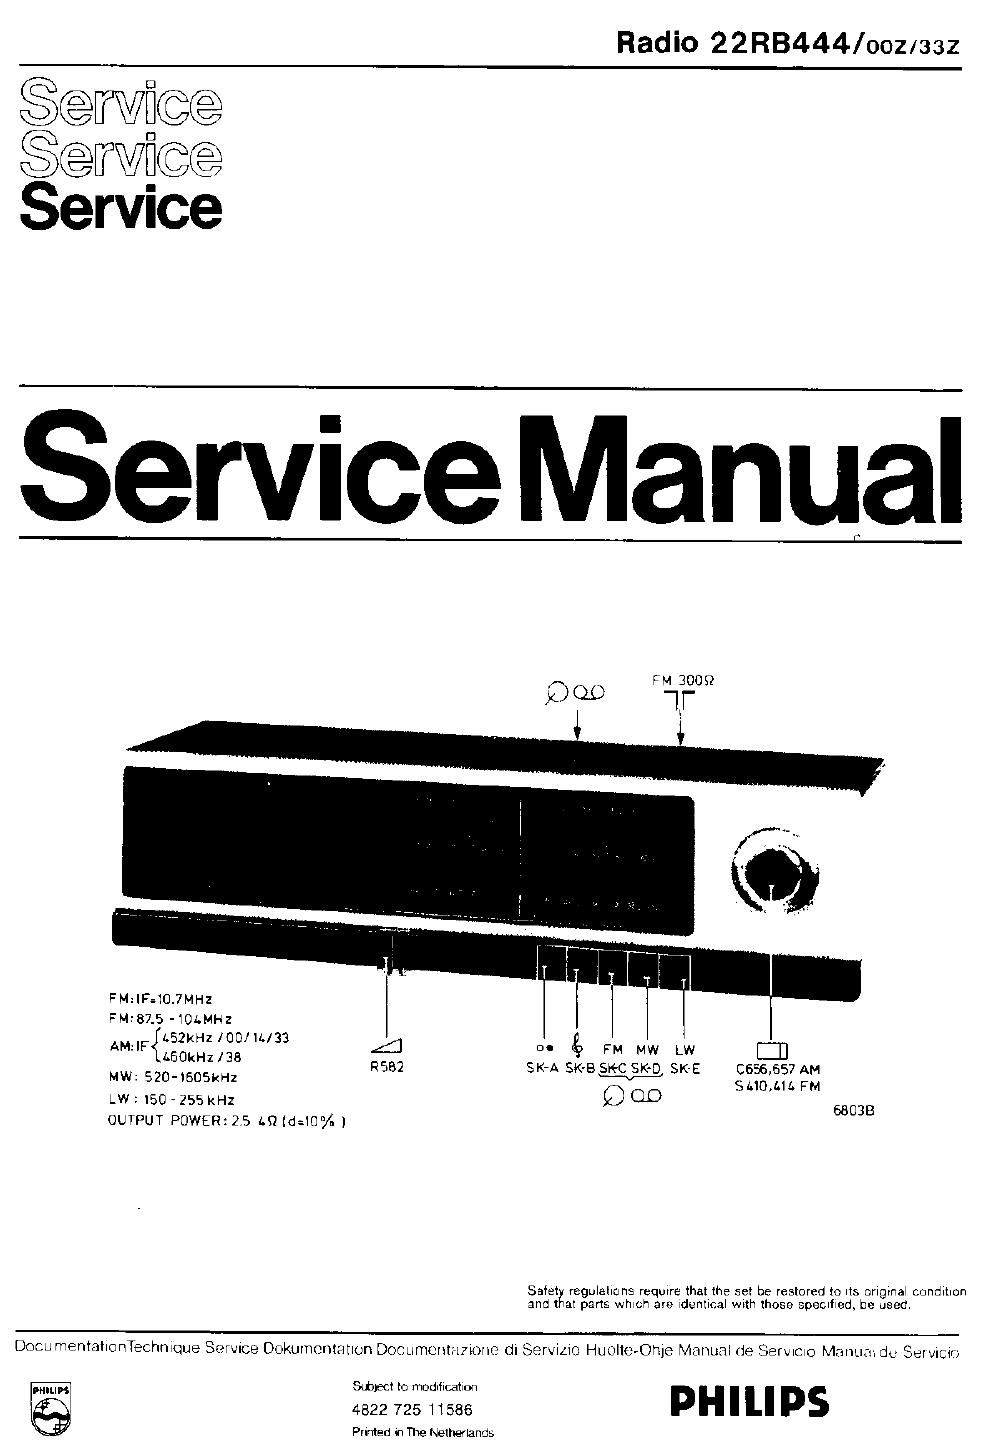 philips 22 rb 444 service manual